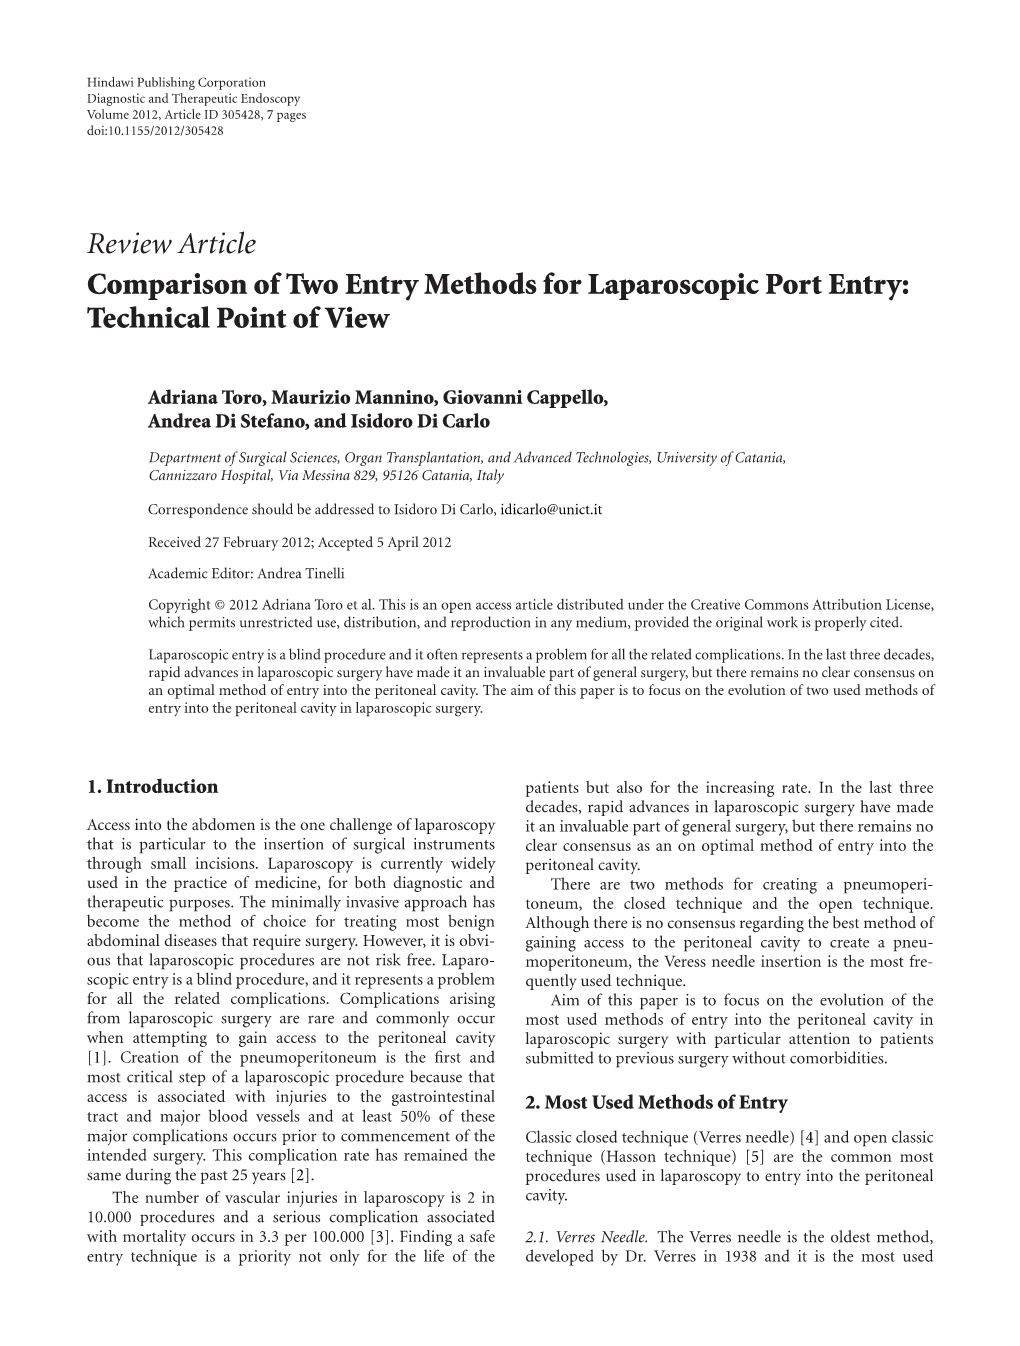 Review Article Comparison of Two Entry Methods for Laparoscopic Port Entry: Technical Point of View